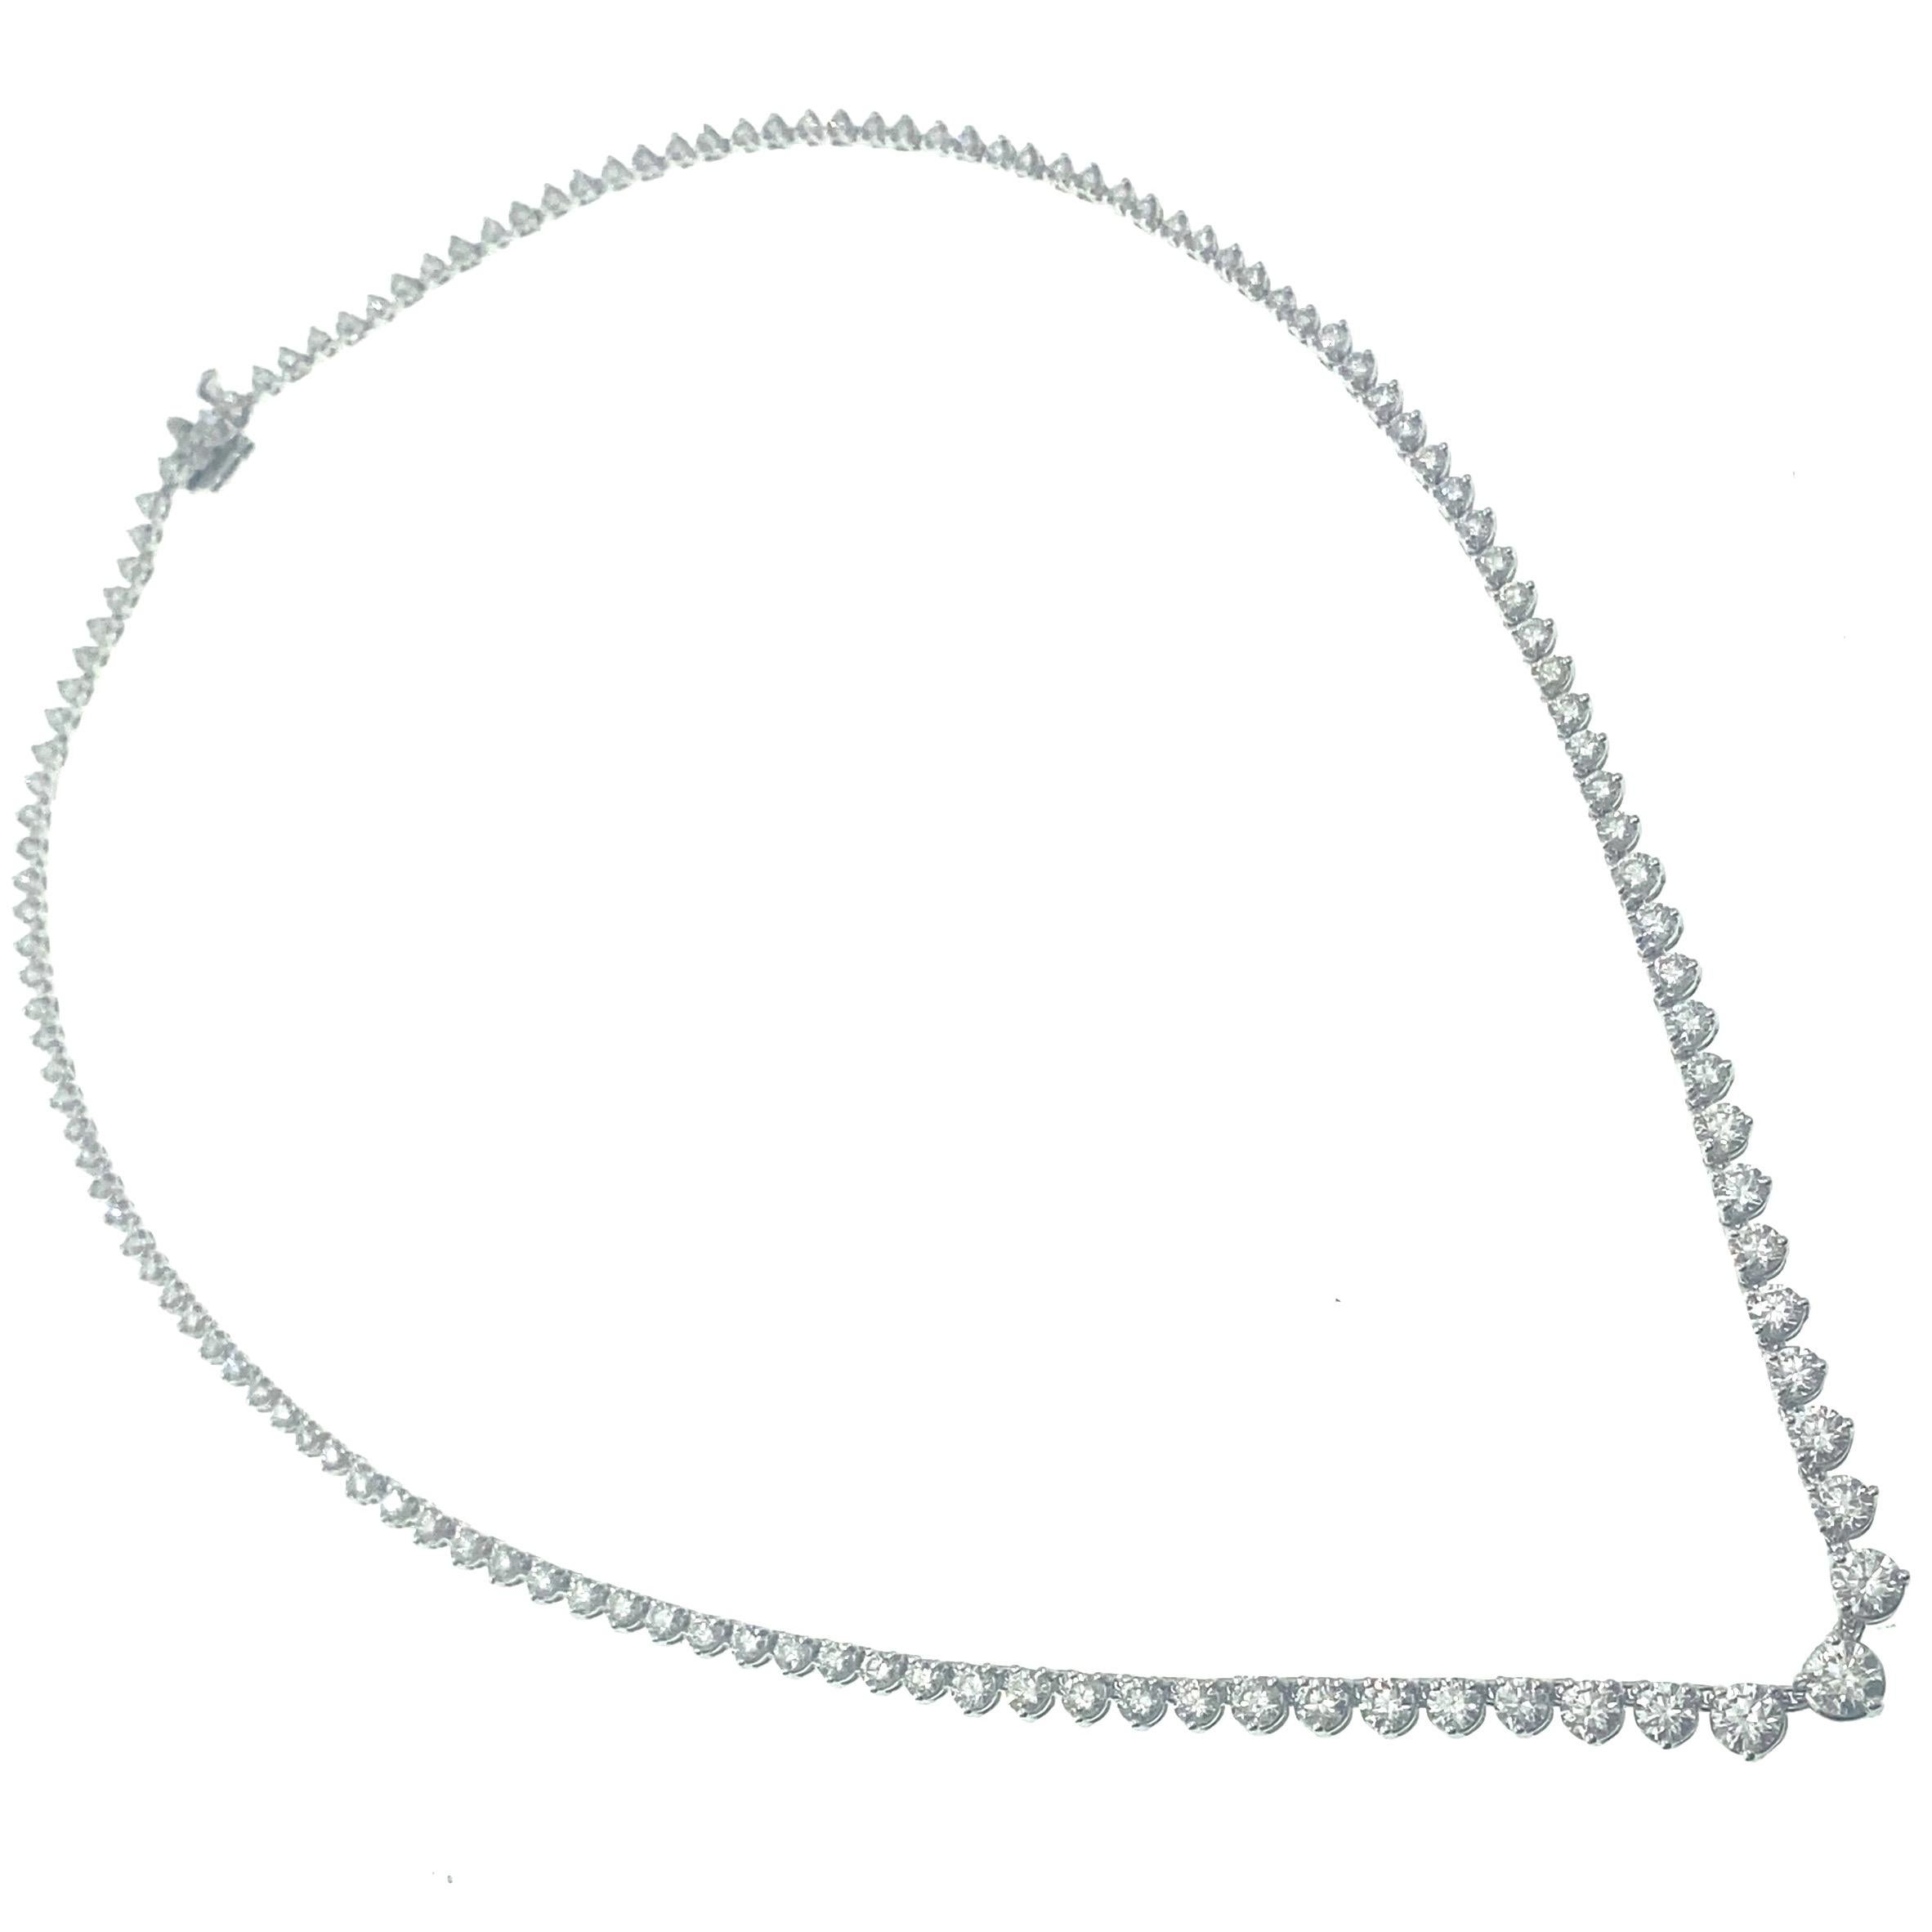 Diamond Riviera Necklace 7.00 tcw in 14kt White Gold 6